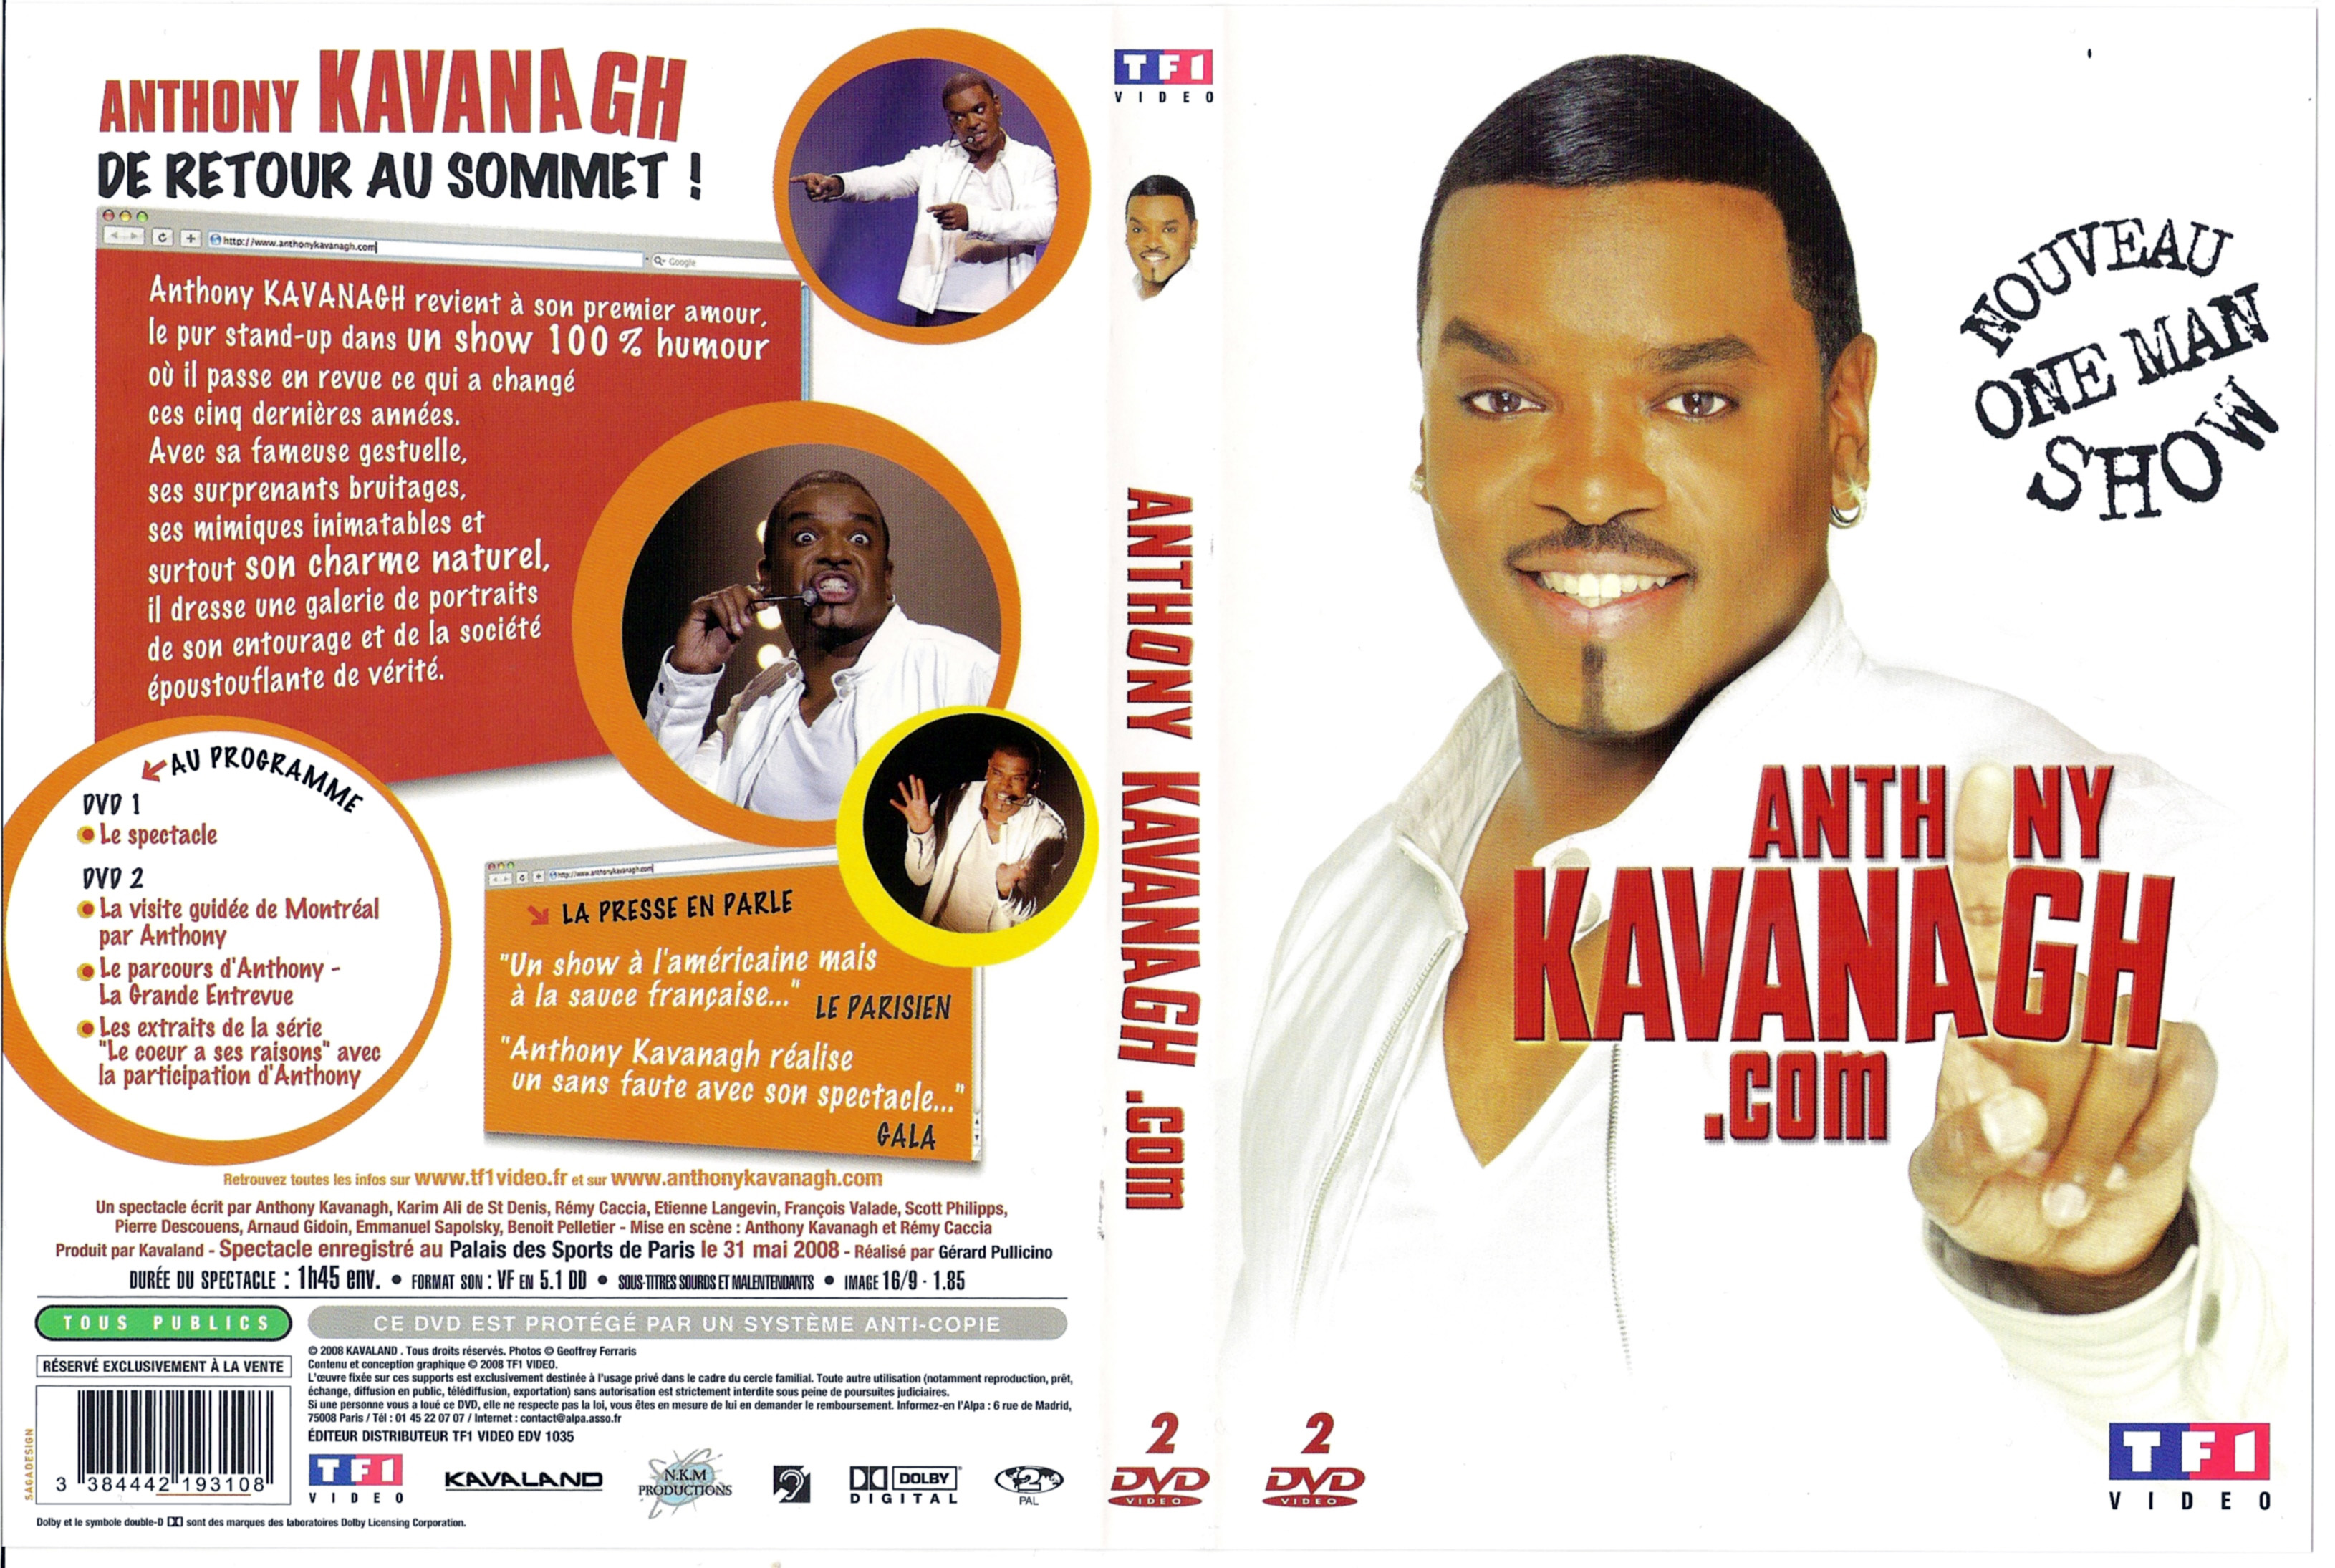 Jaquette DVD Anthony Kavanagh point com